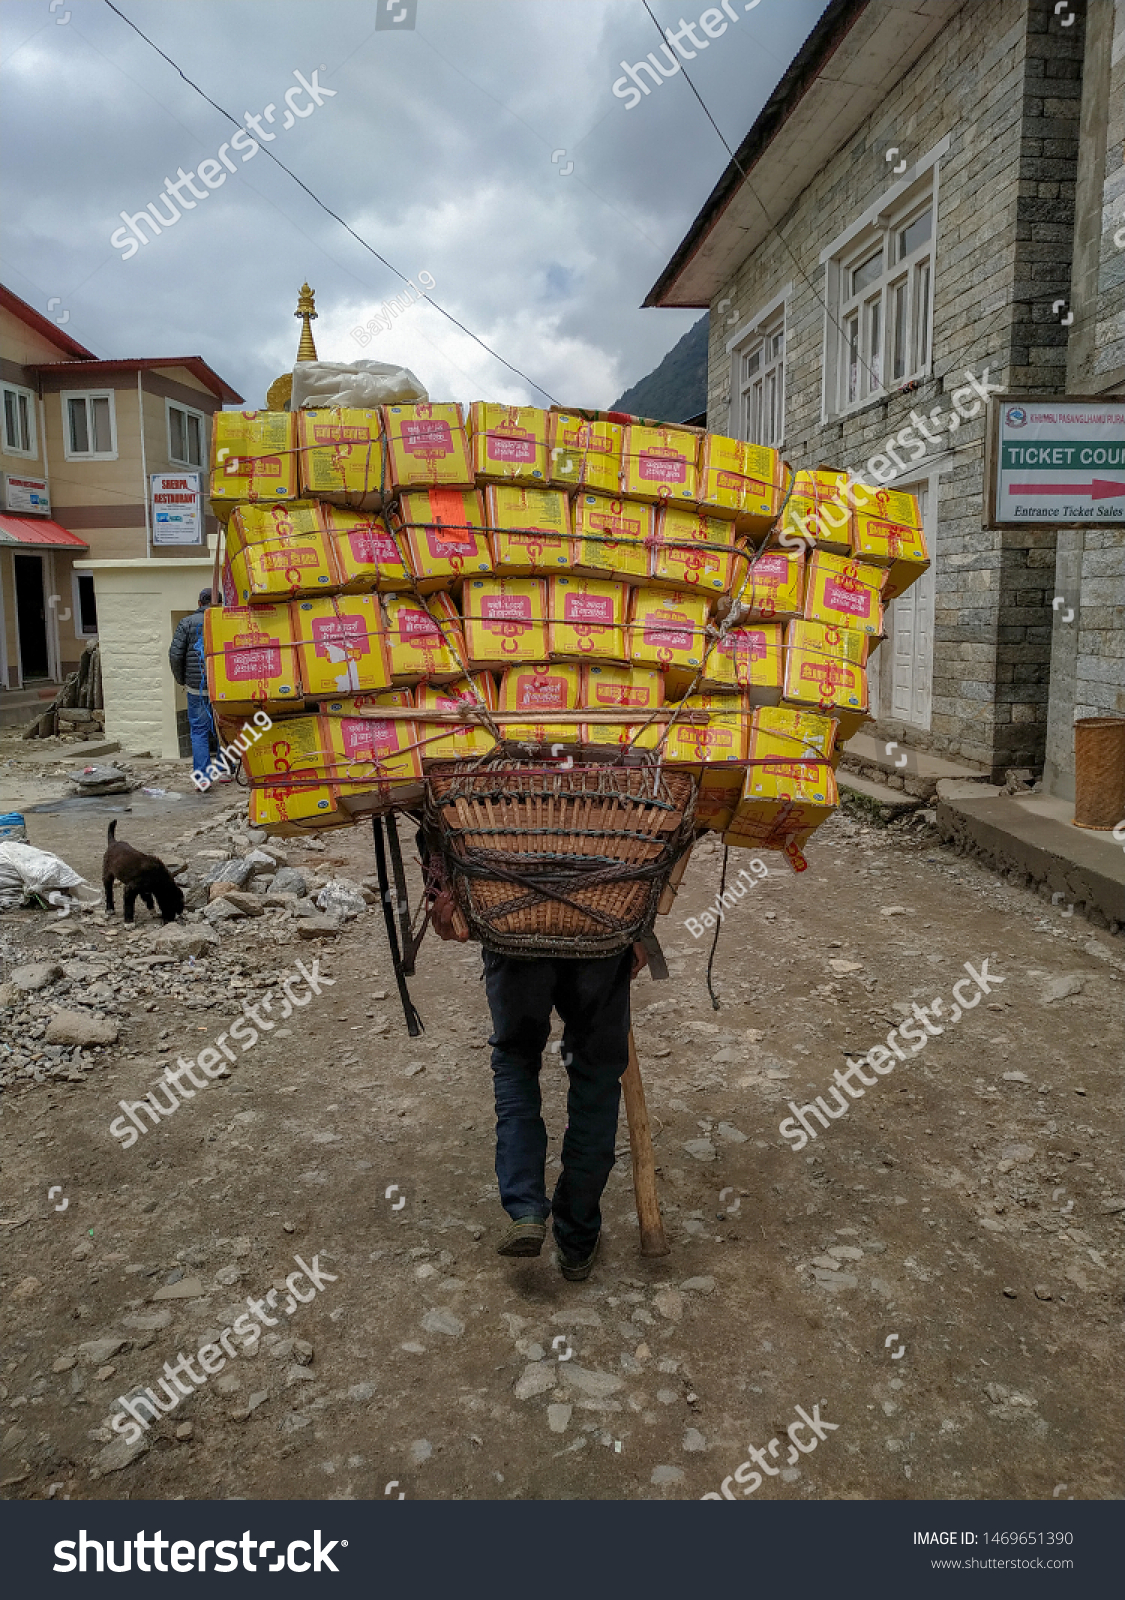 stock-photo-nepal-lukla-april-sherpa-porter-carries-boxes-with-food-drinks-and-other-stuff-on-the-1469651390.jpg